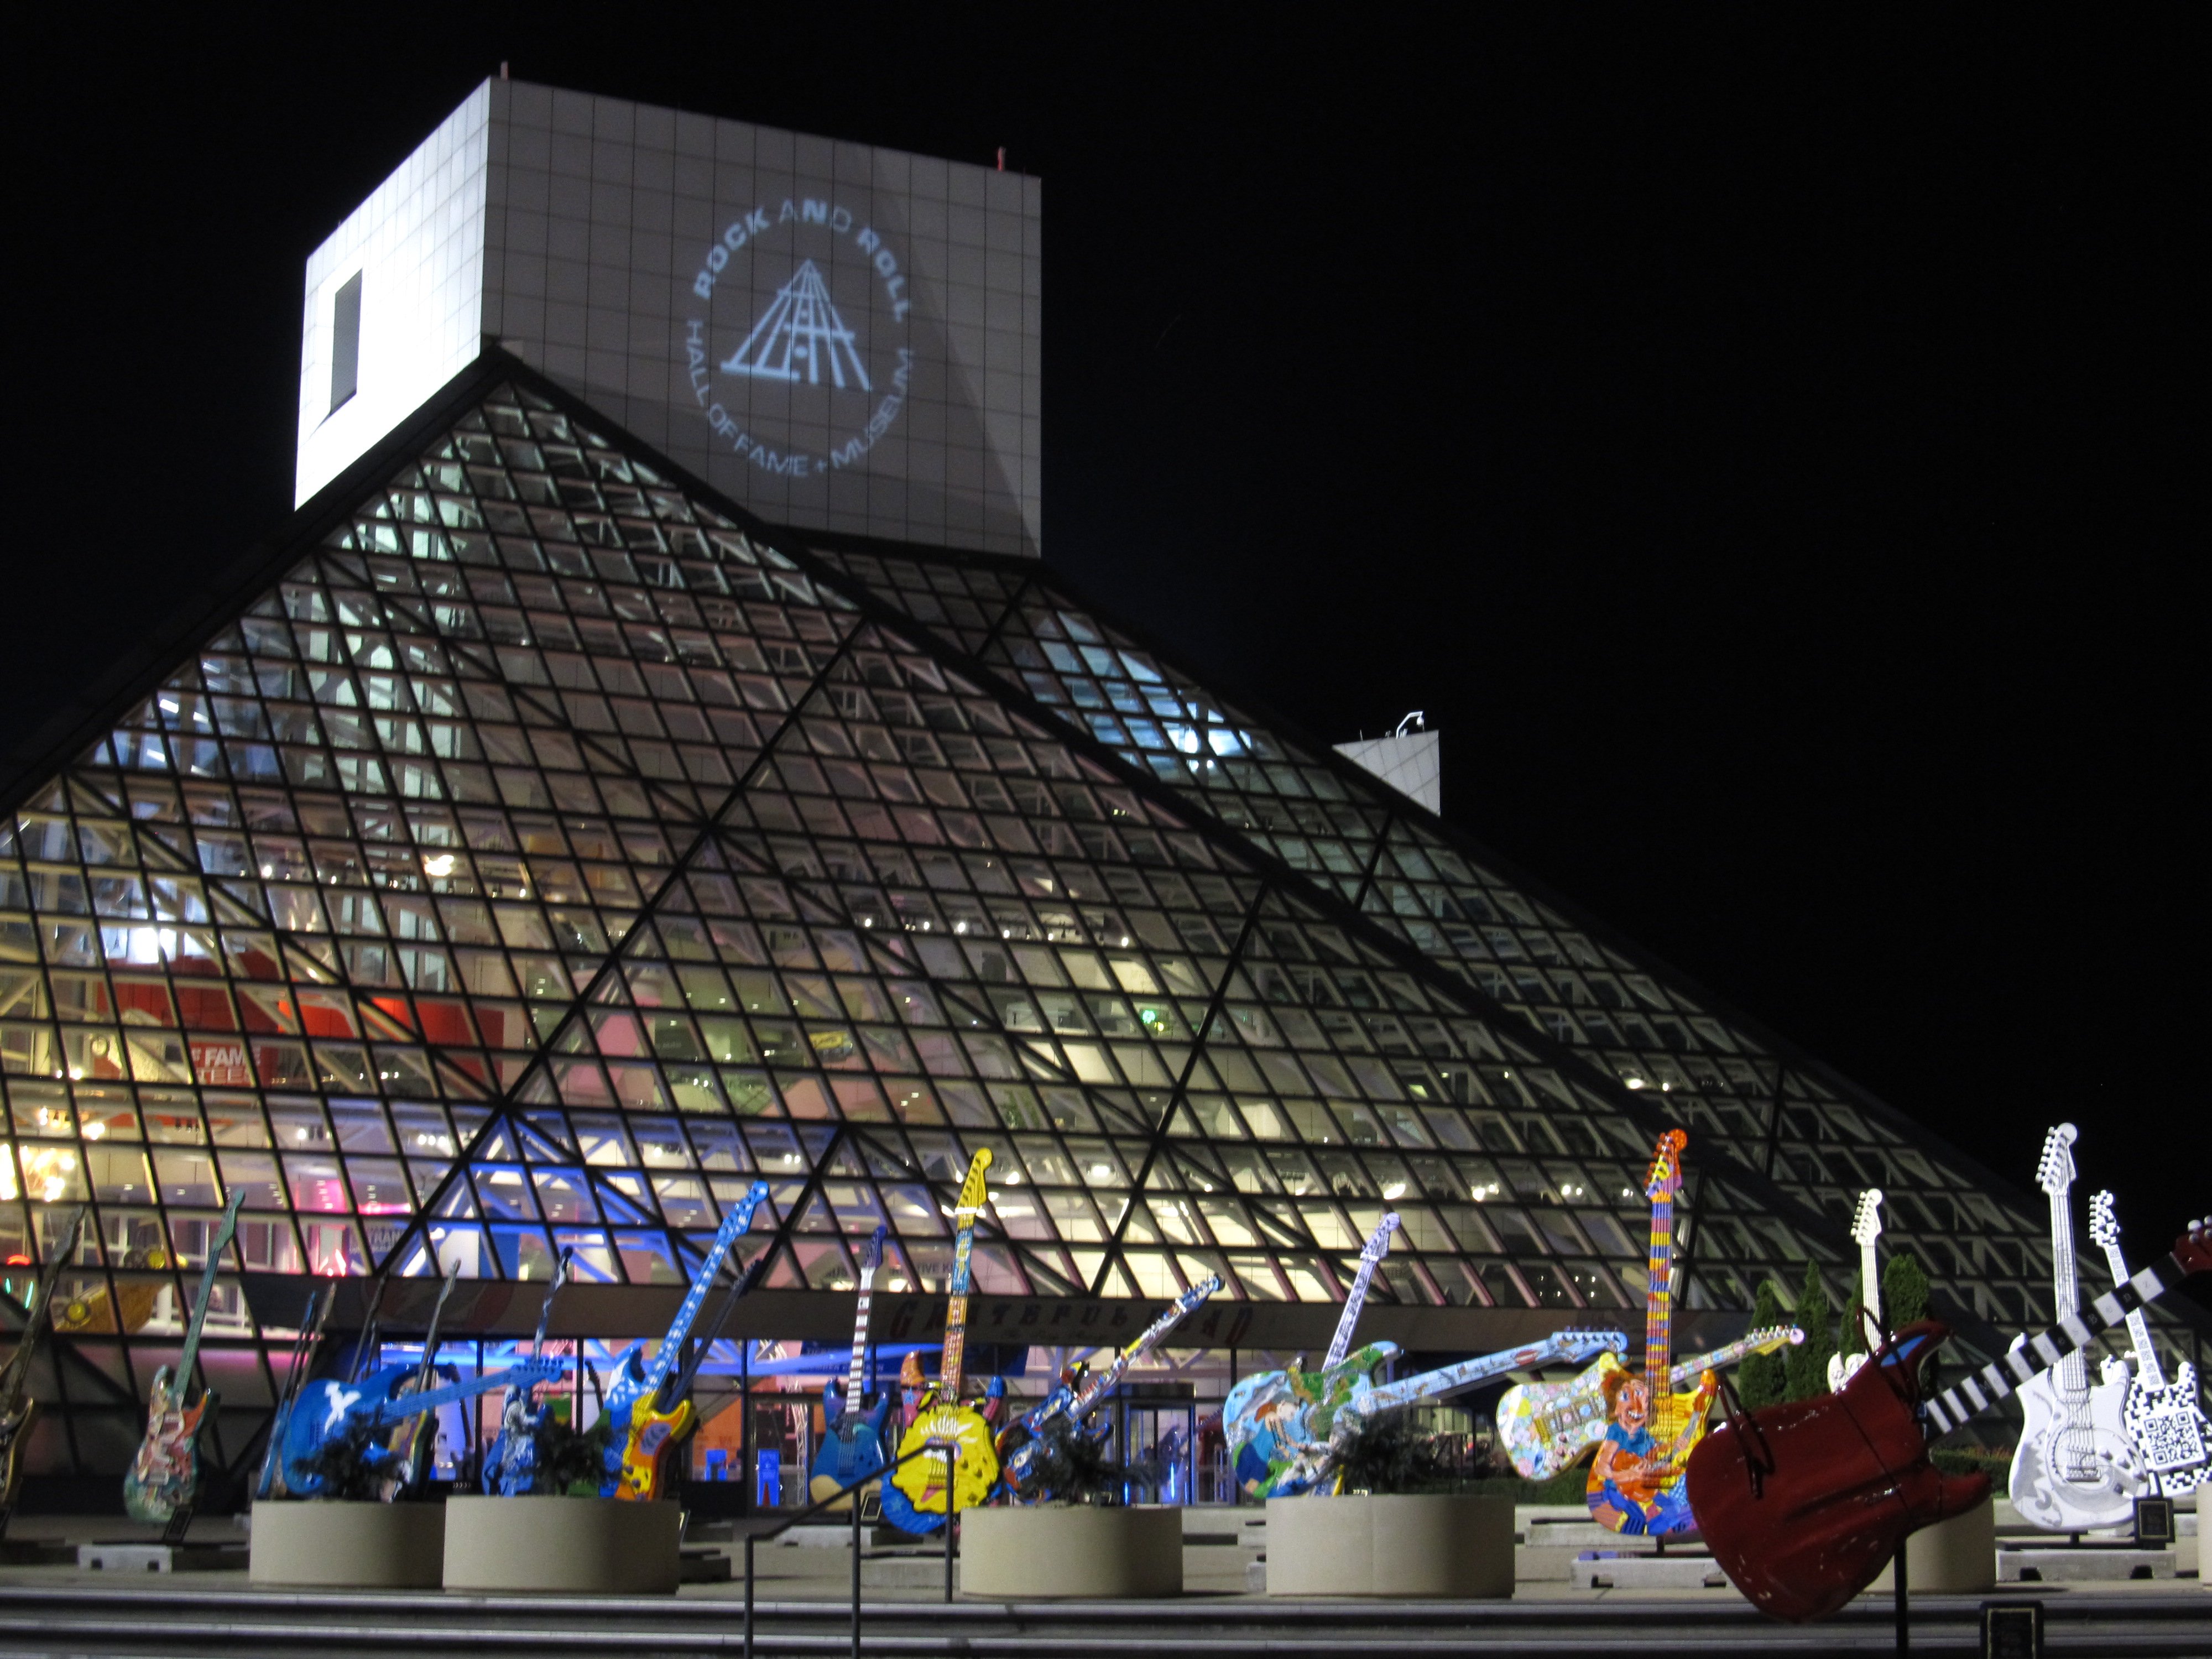 Things to See in Cleveland: Rock and Roll Hall of Fame